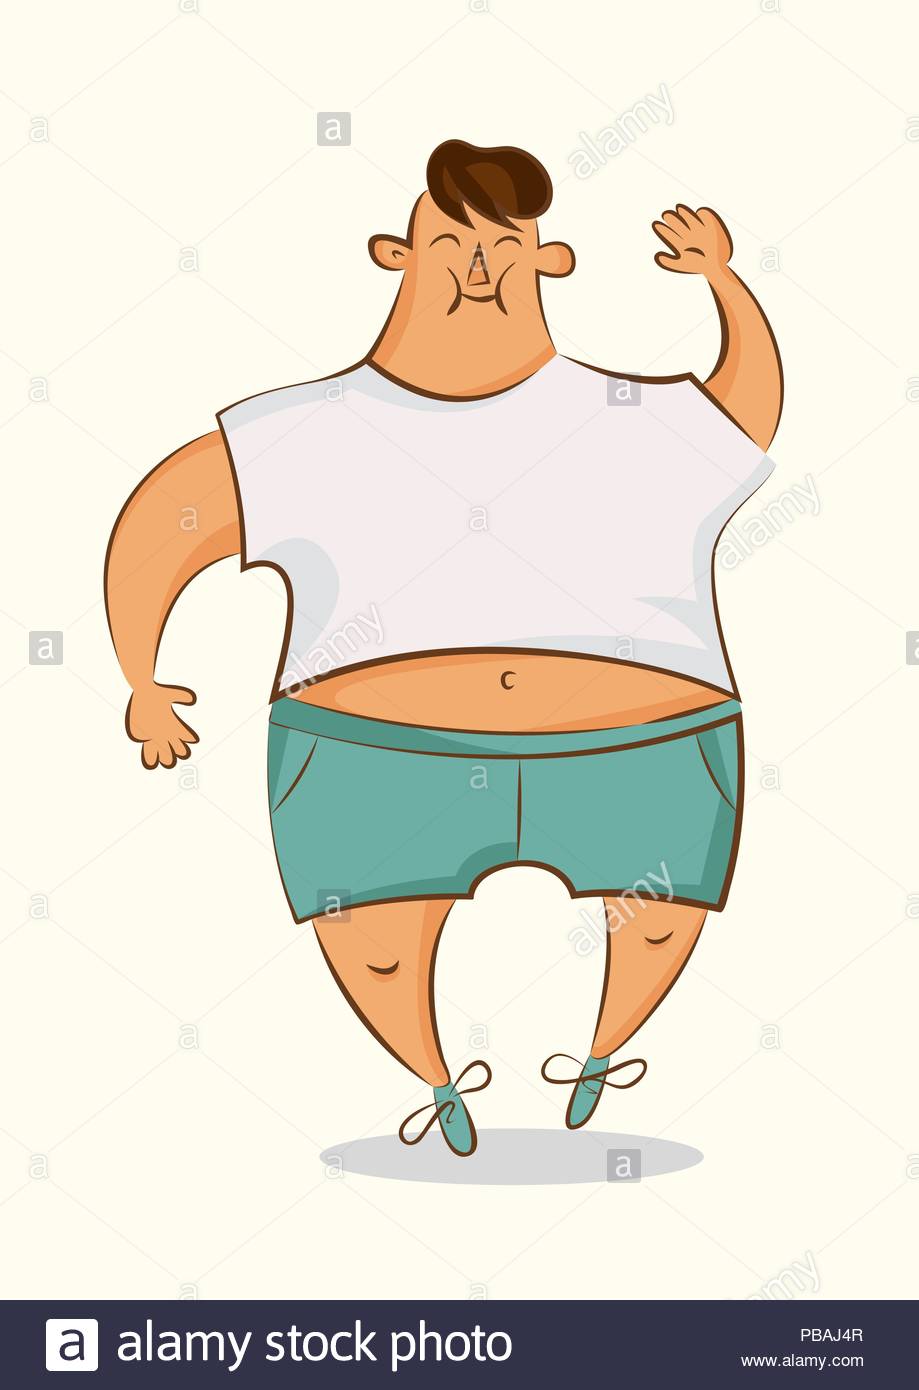 Fat Cartoon Character Boy With Overweight Isolated Vector